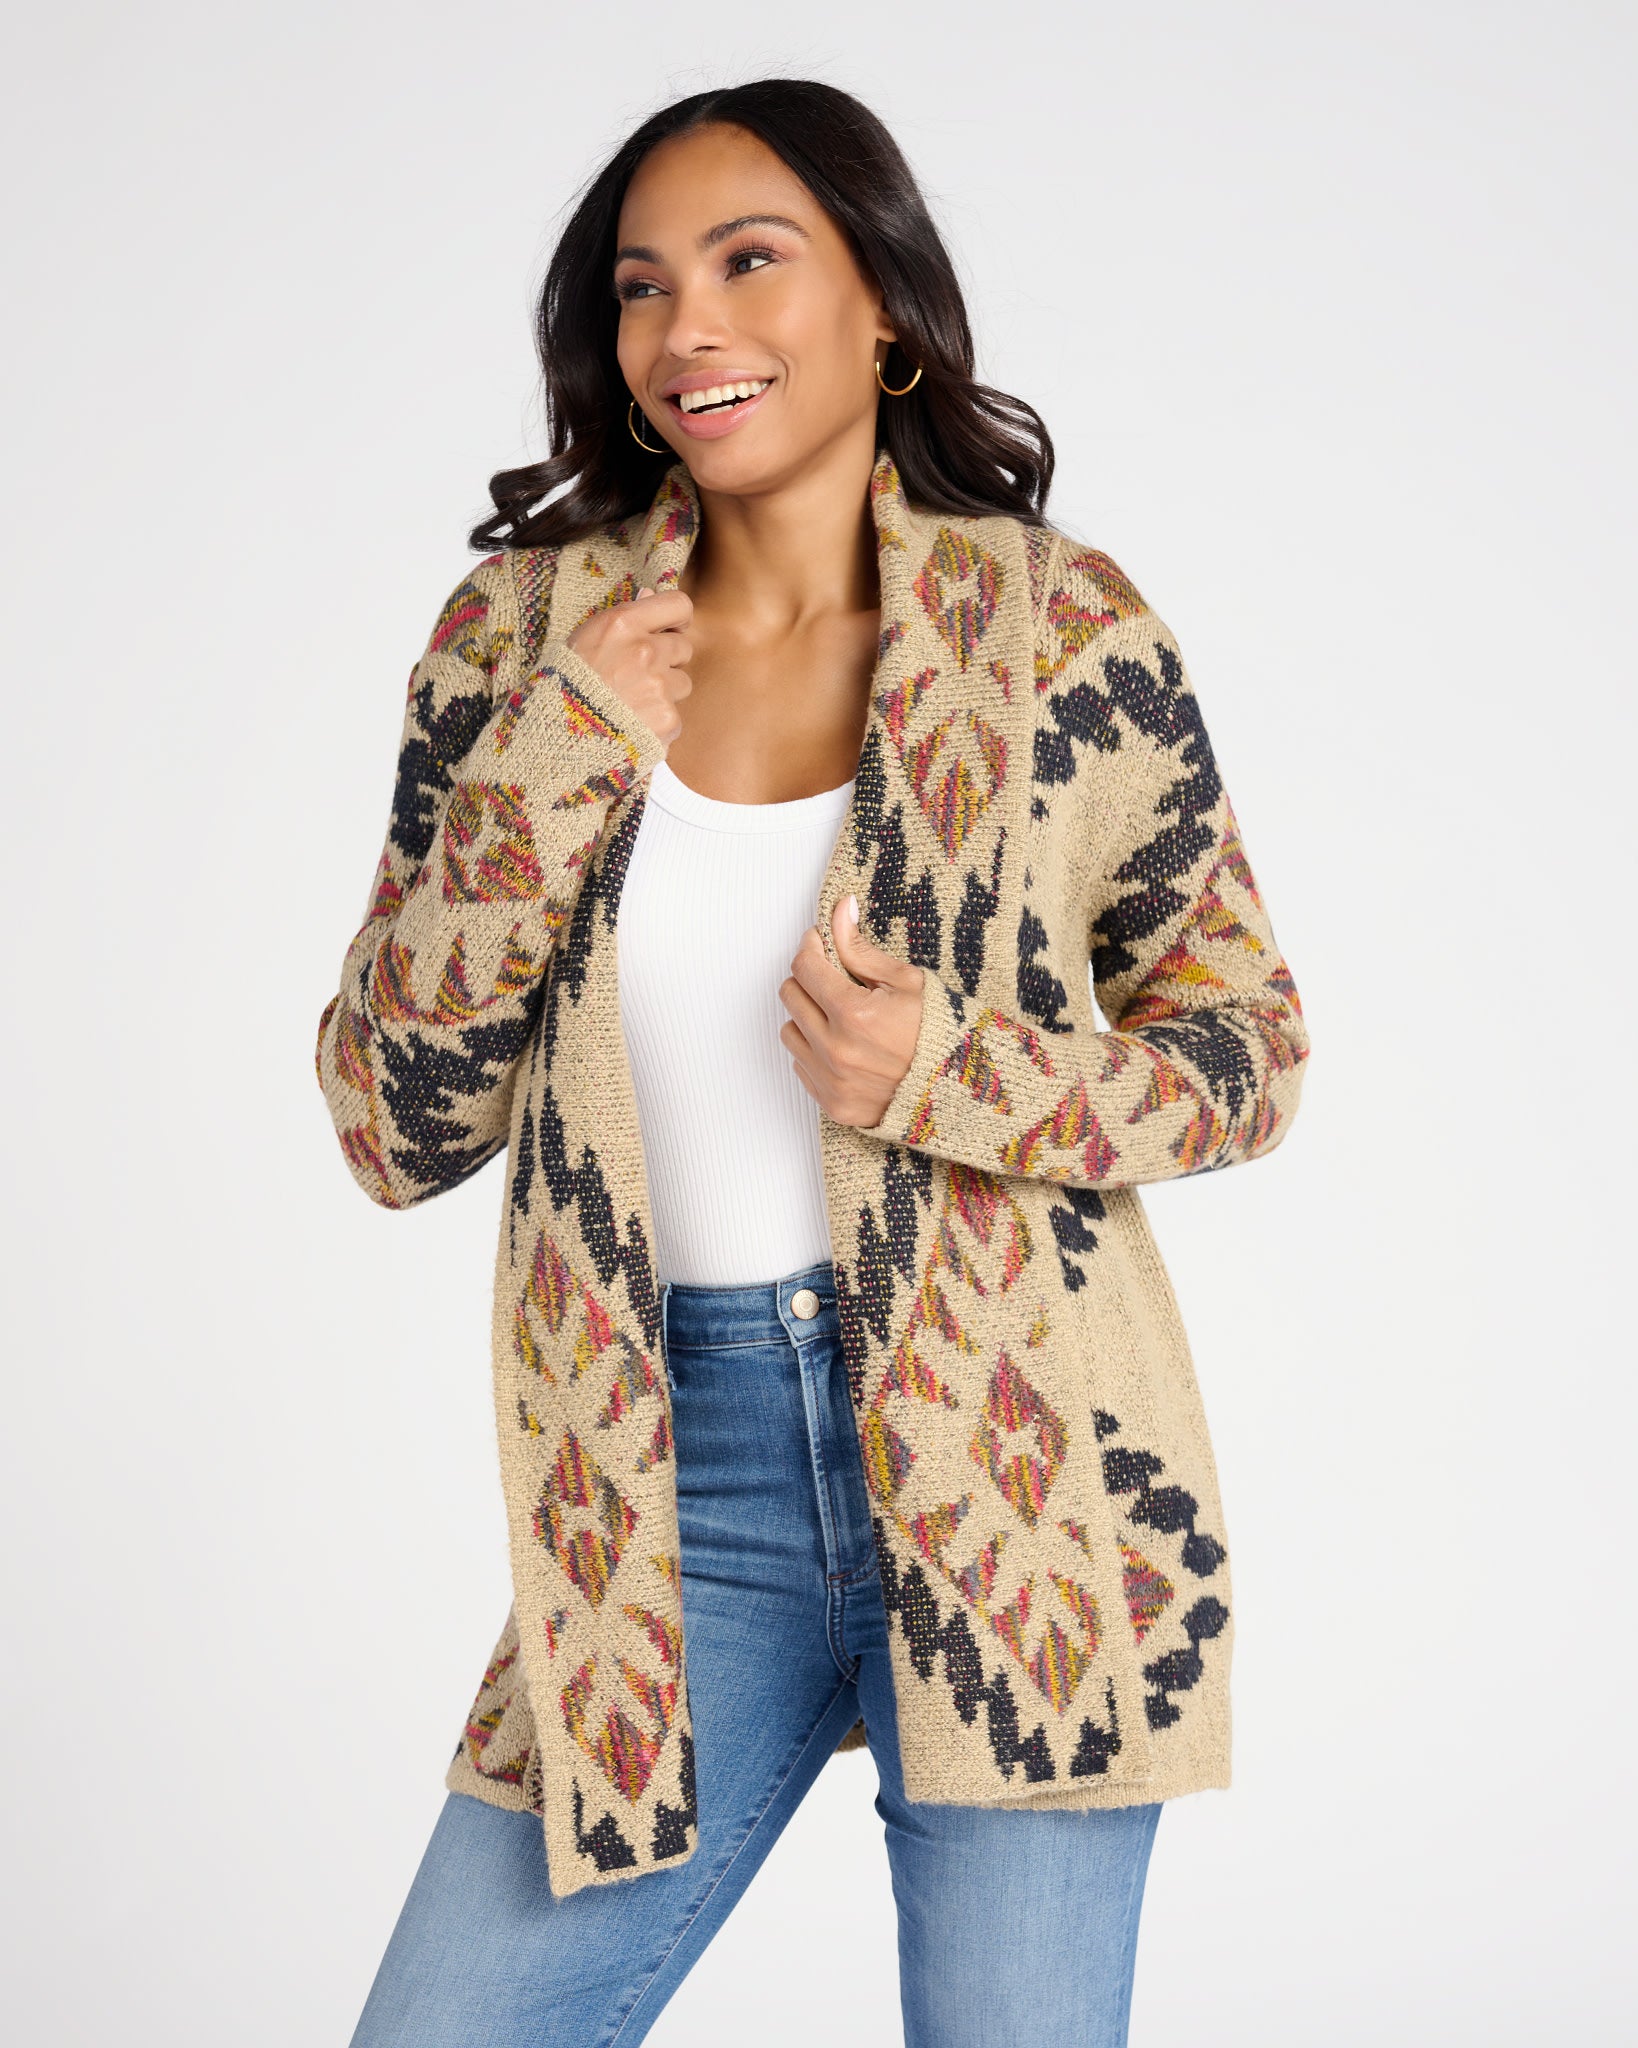 Gone with the west Aztec Cardigan - Sweaters